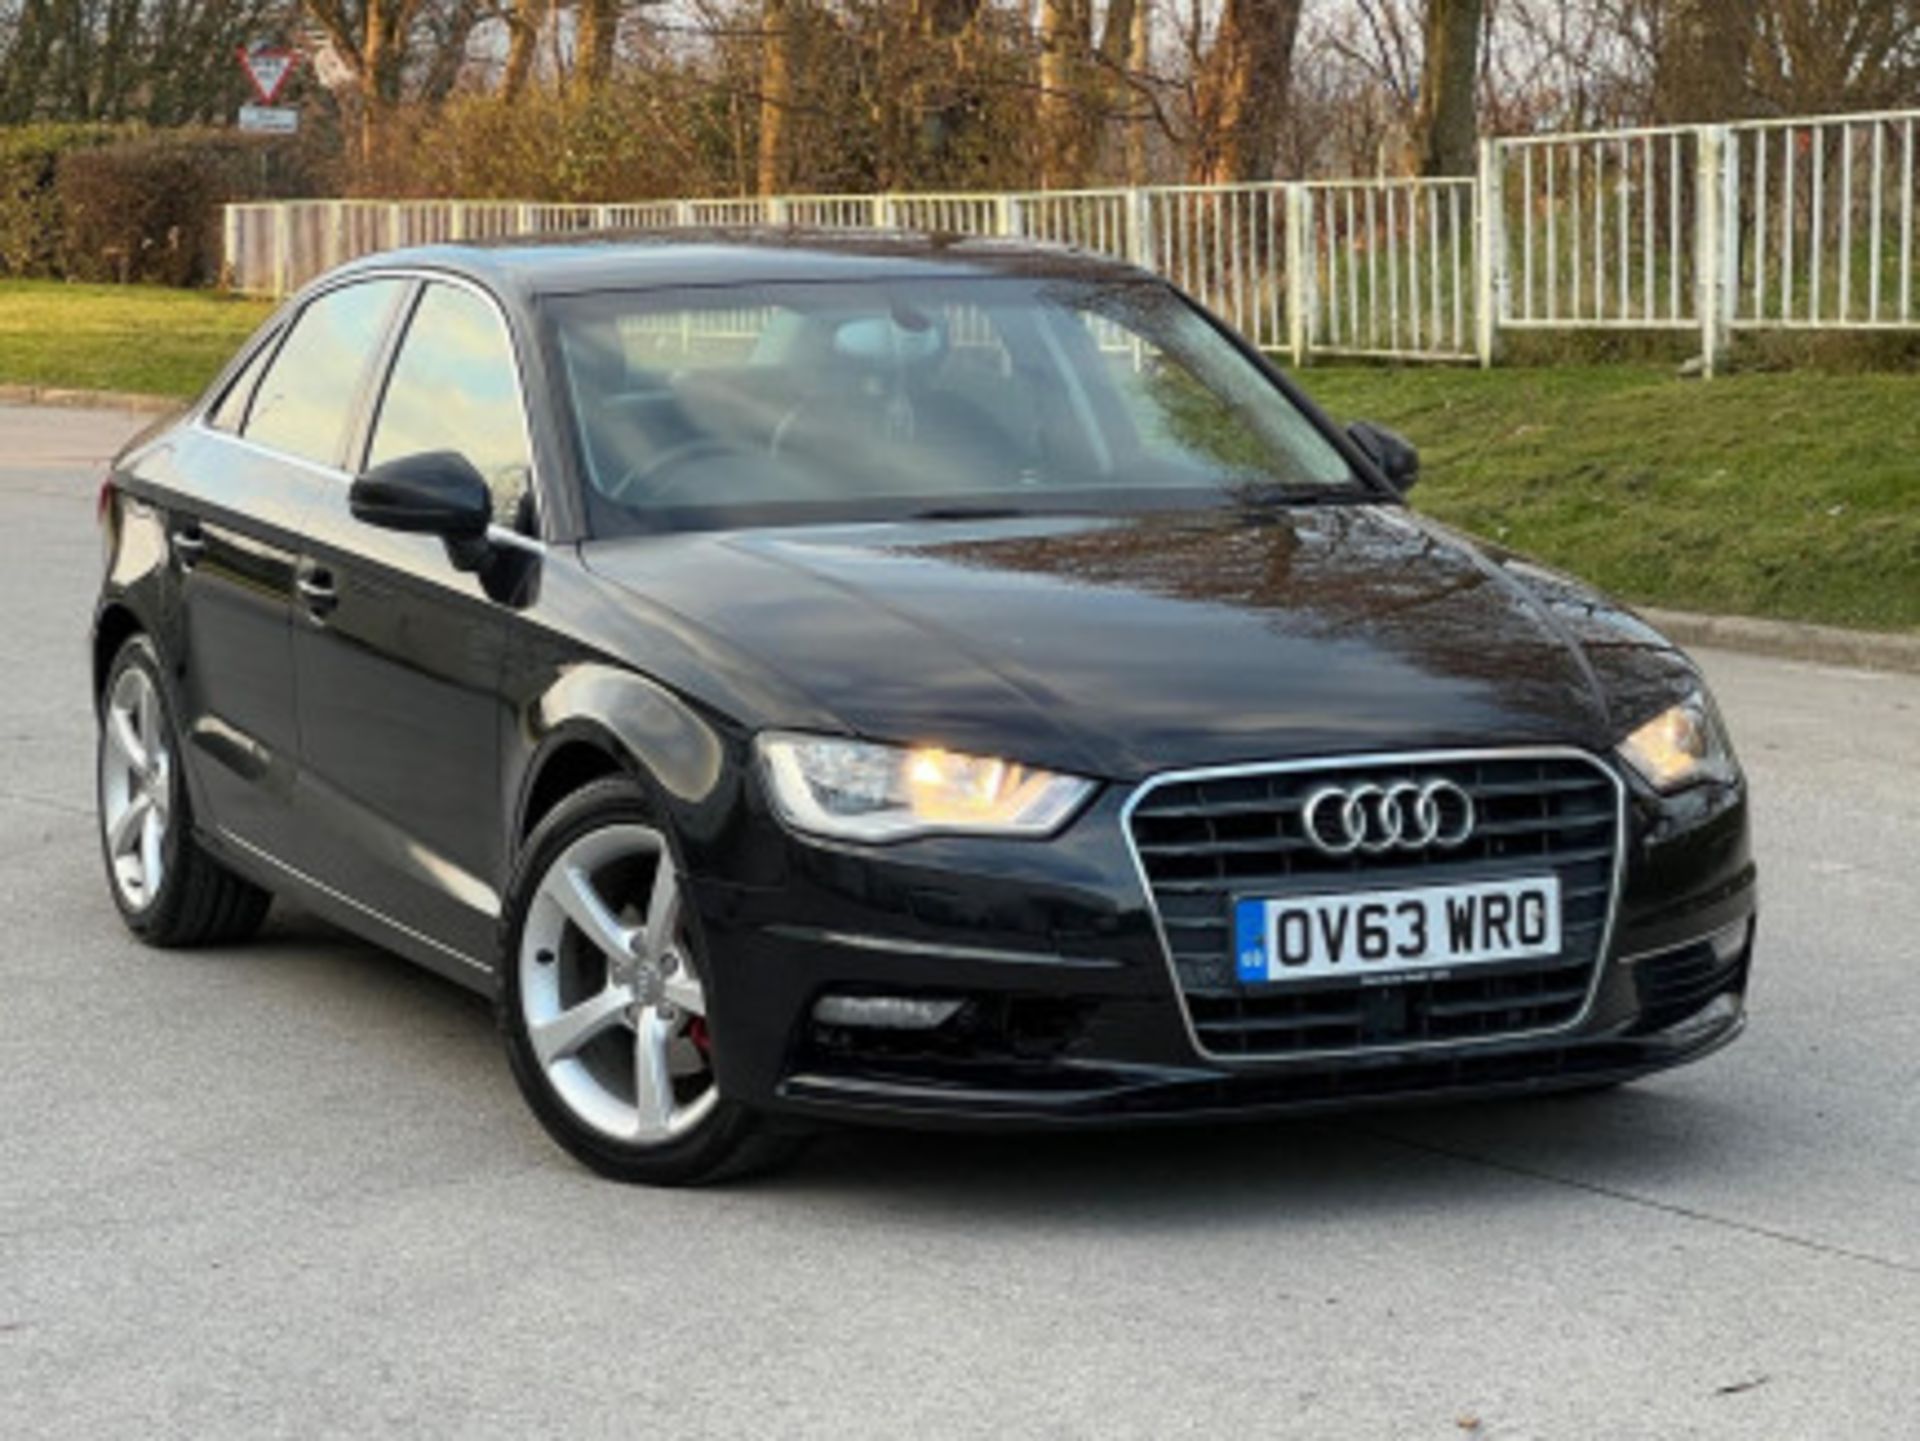 AUDI A3 2.0TDI SPORTBACK - STYLE, PERFORMANCE, AND COMFORT COMBINED >>--NO VAT ON HAMMER--<< - Image 64 of 216